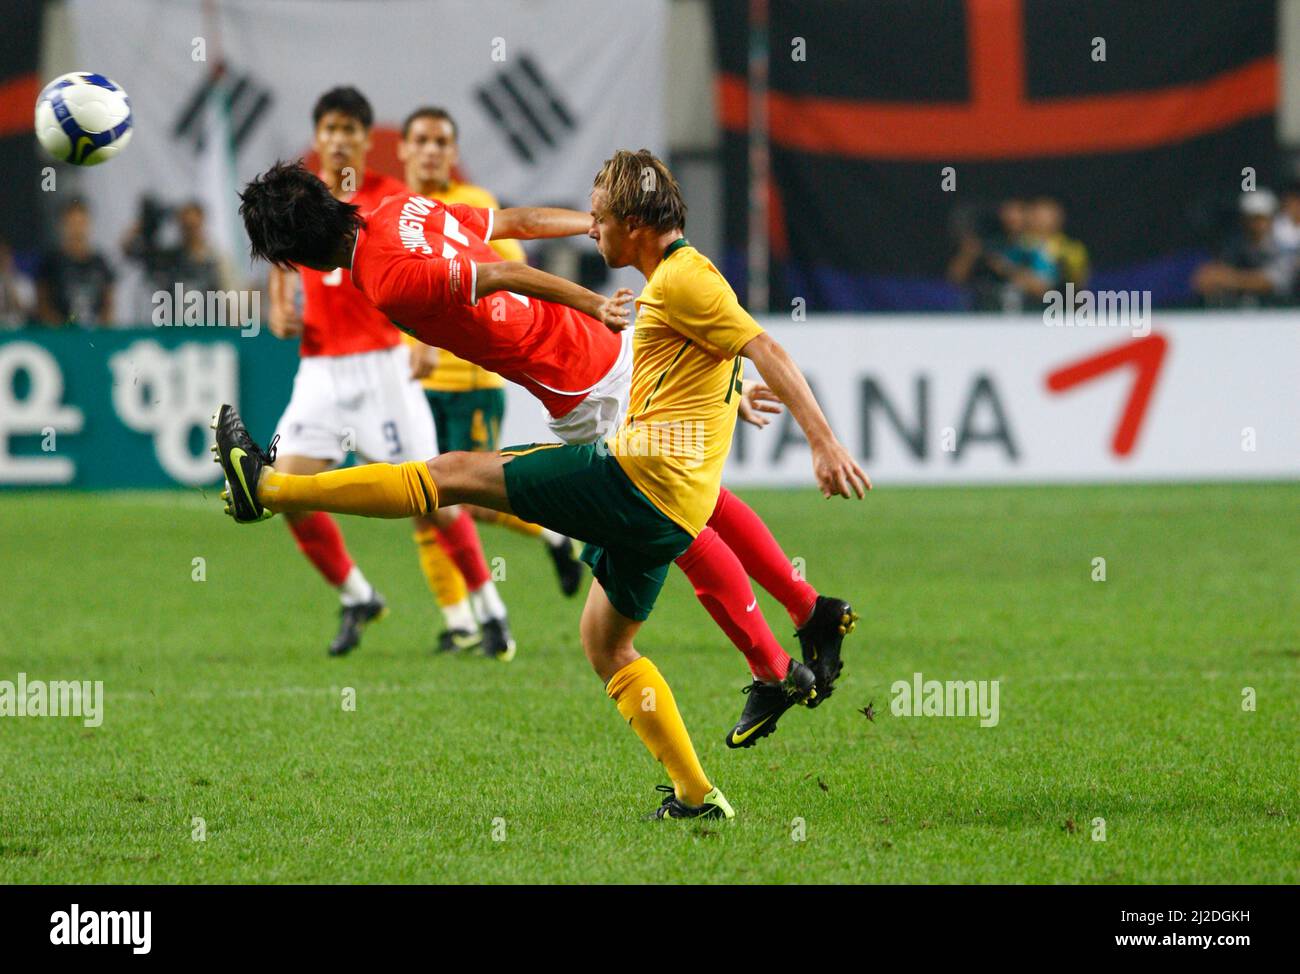 Sep 5, 2009-Seoul, South Korea-Brett Holman of Australia and Lee Chung-Yong of South Korea compete for the ball during the international friendly match between South Korea and the Australian Socceroos at Seoul World Cup Stadium on September 5, 2009 in Seoul, South Korea. Stock Photo